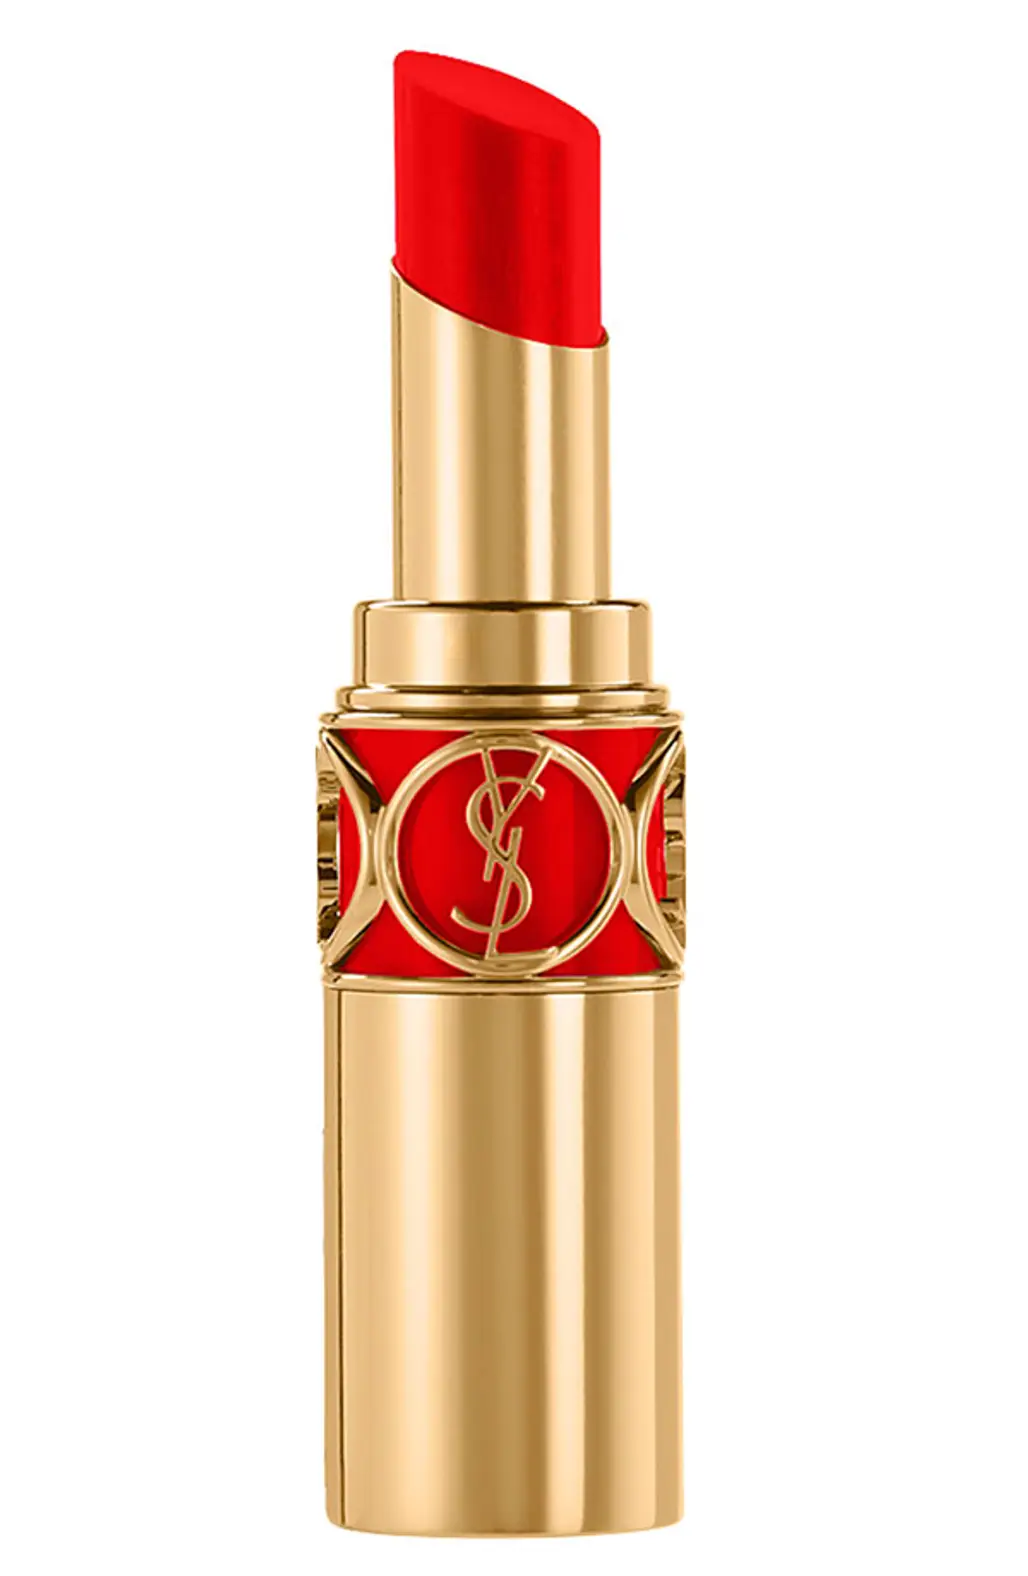 Yves Saint Laurent Rouge Volupté Lipstick in "Red Taboo"